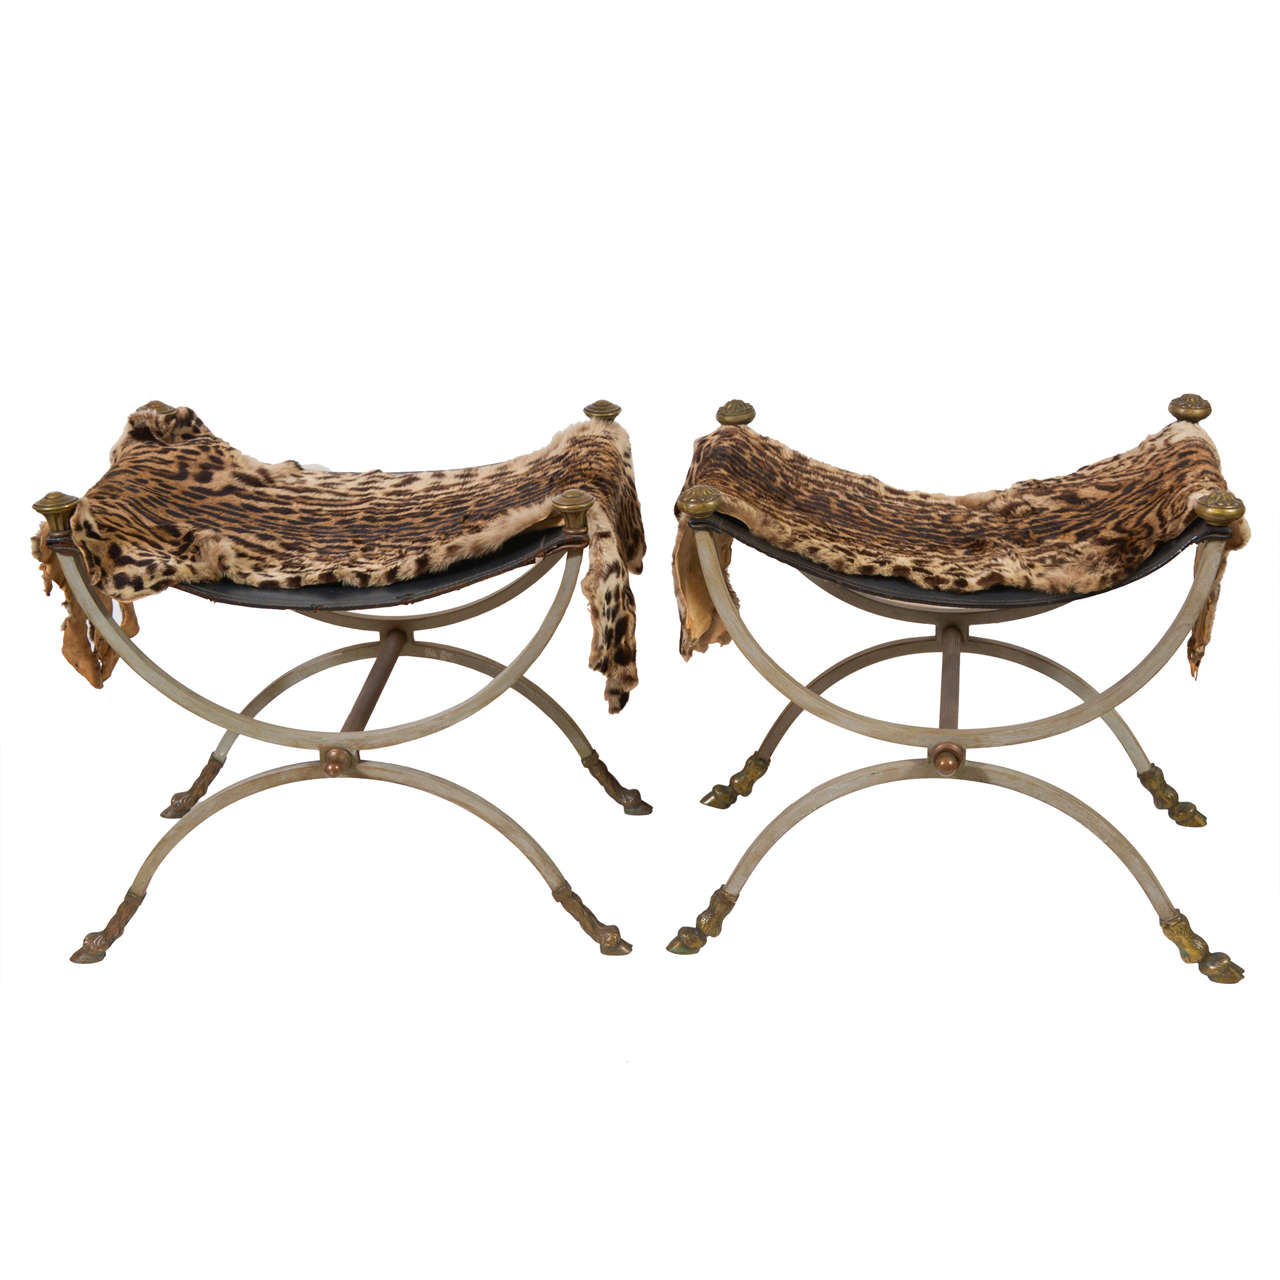 Pair of Neoclassical Wrought Iron Curule Stools